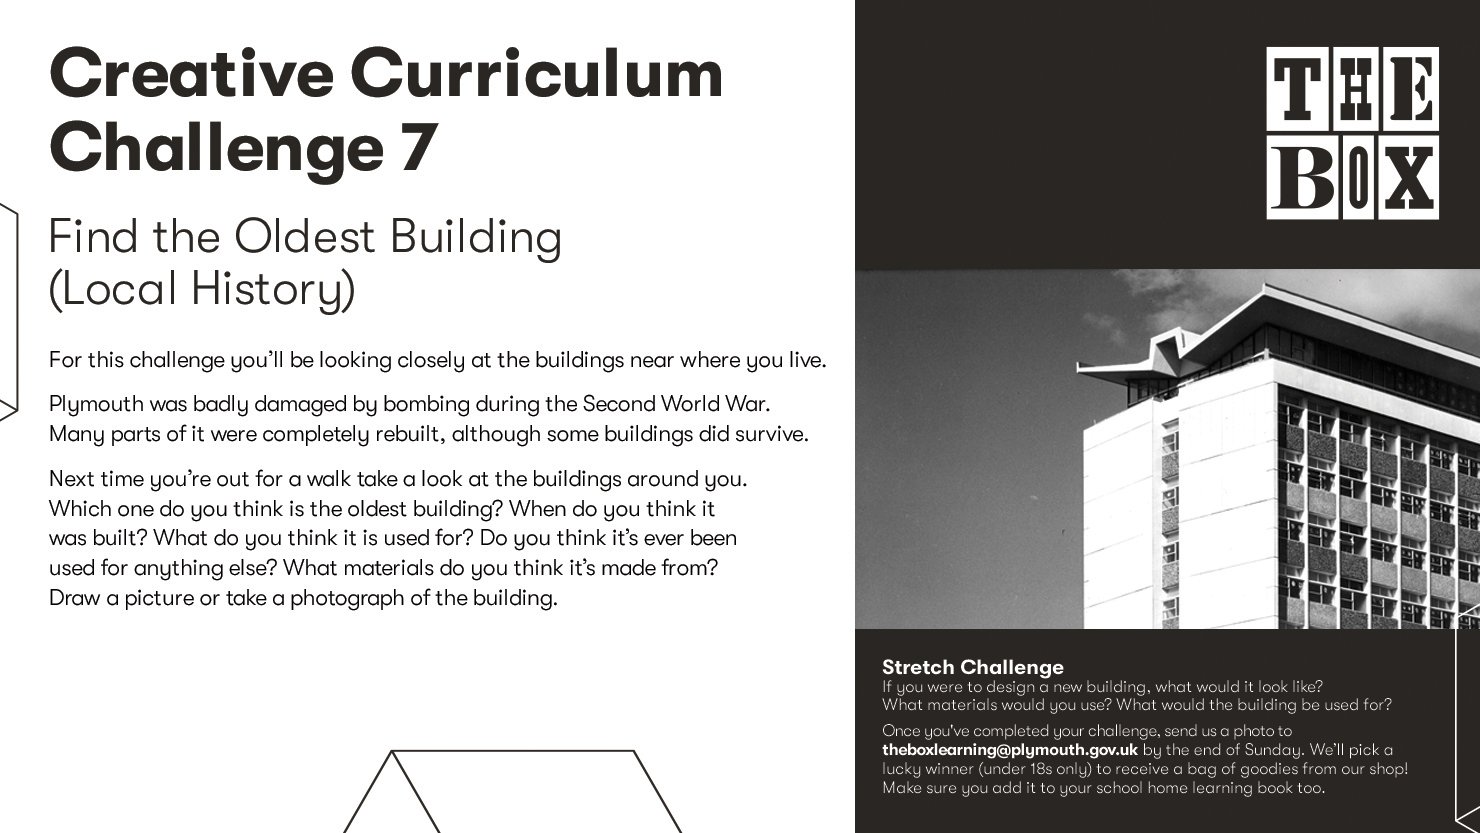 Graphic for The Box's Curriculum Challenge 7